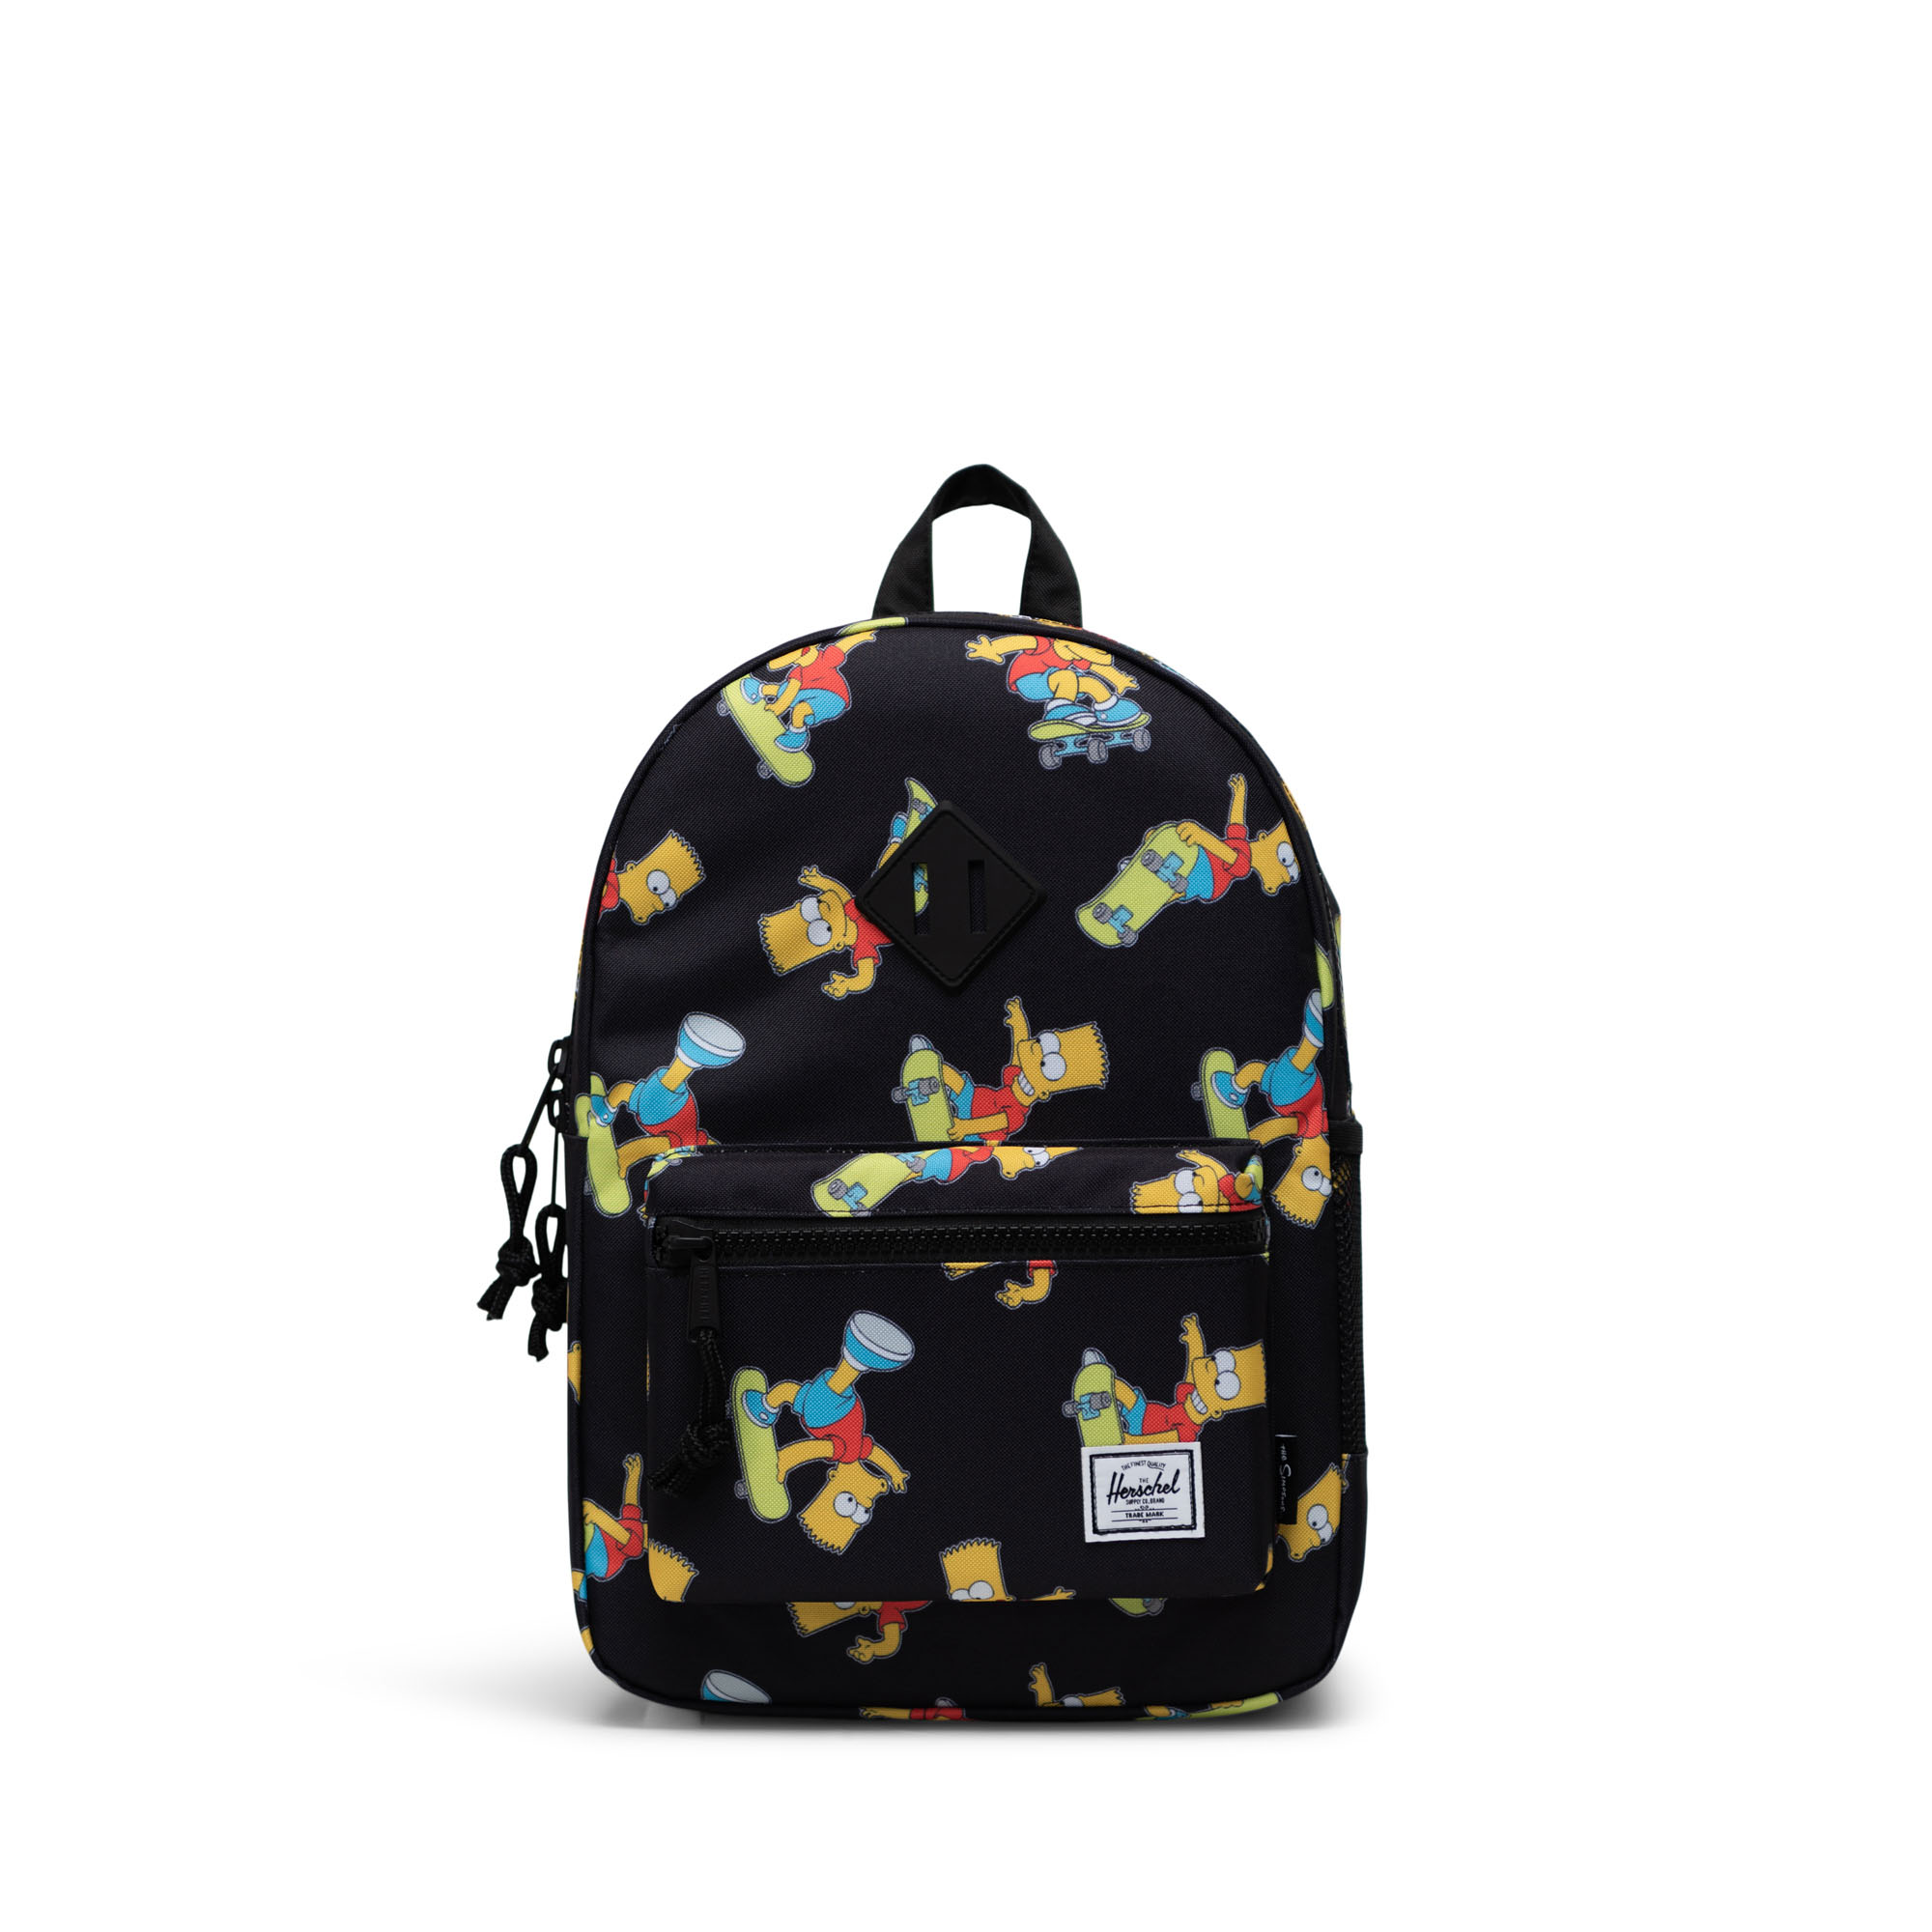 Woodland Camo/navy/red Sac Adulte Mixte Herschel Casual Daypack Multicolore 15 cm 